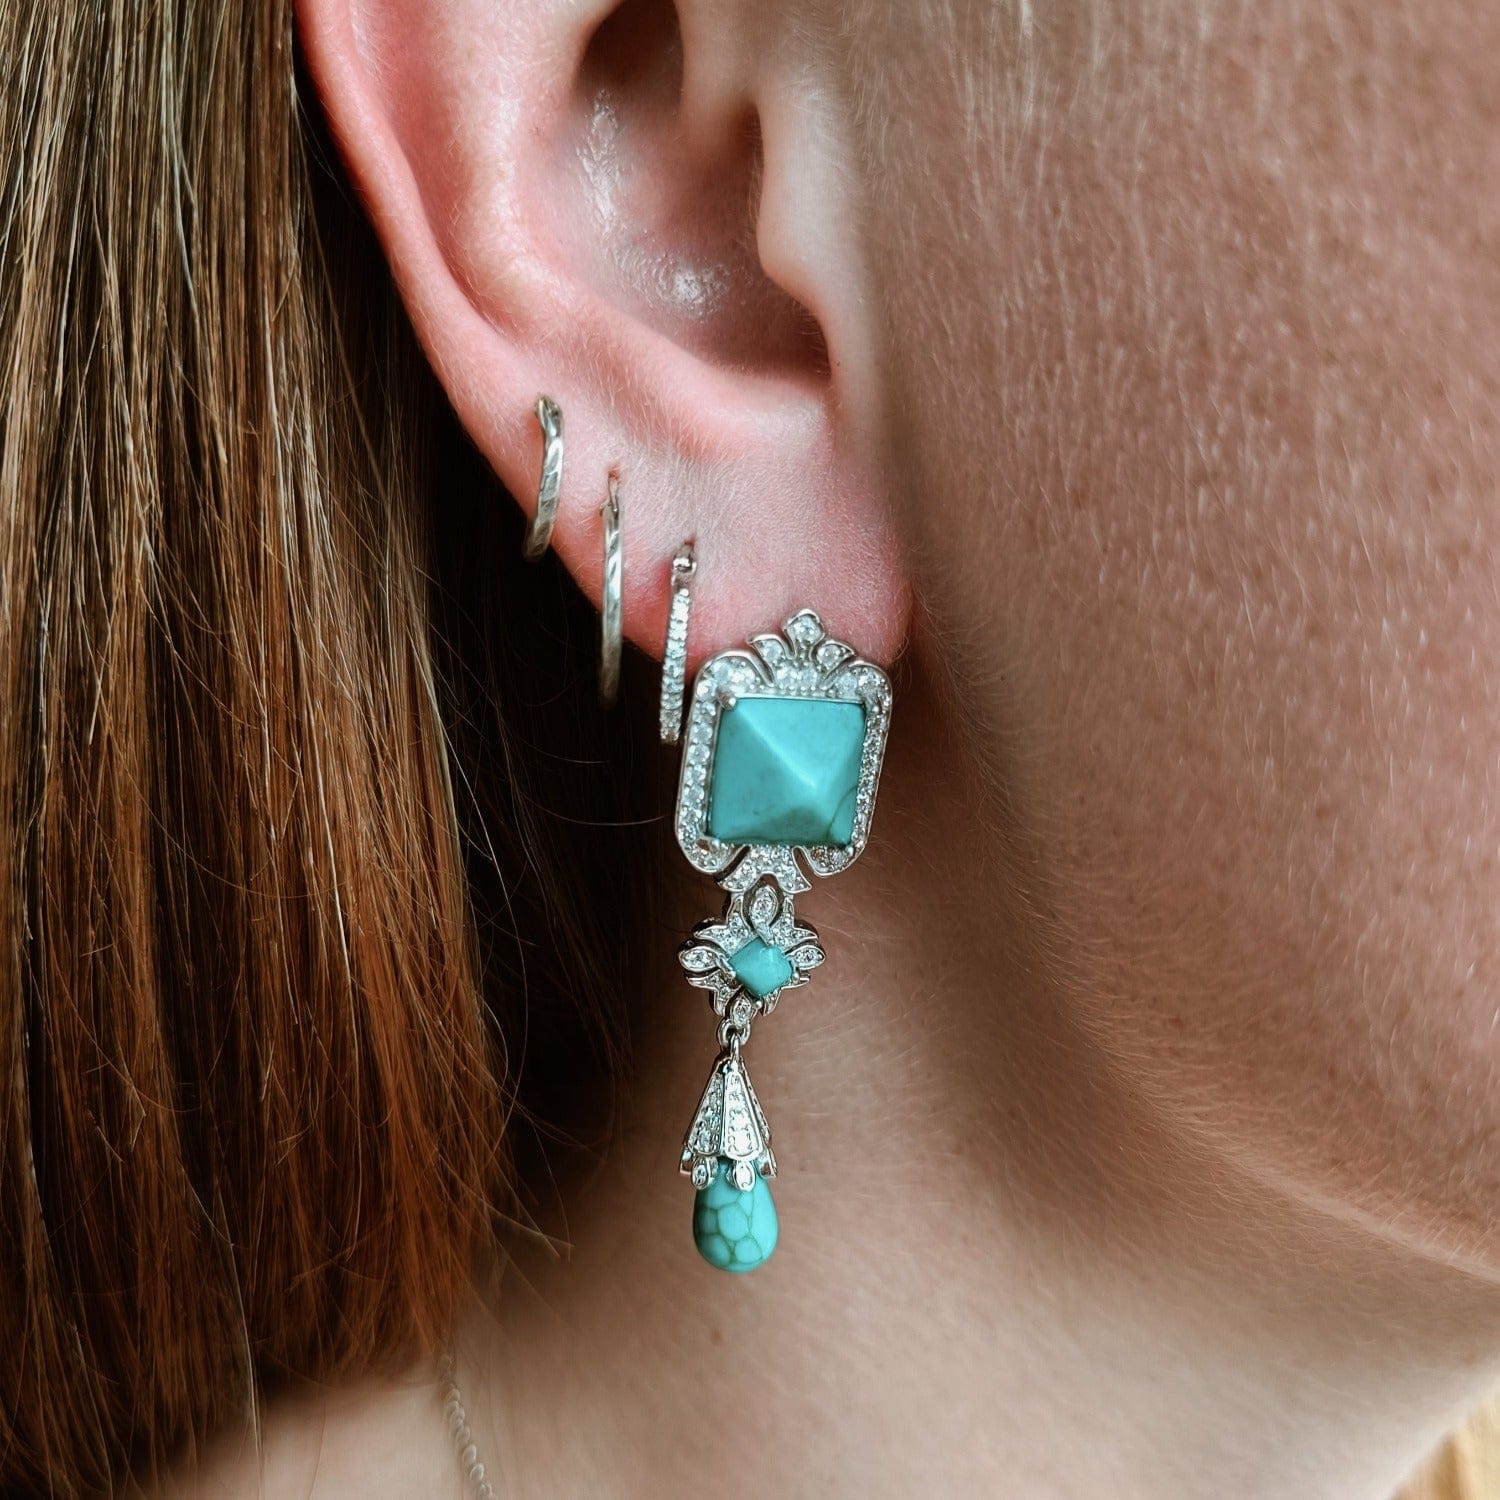 Turquoise Seabed Earrings featuring turquoise stones in a sterling silver setting on a model left ear zoom